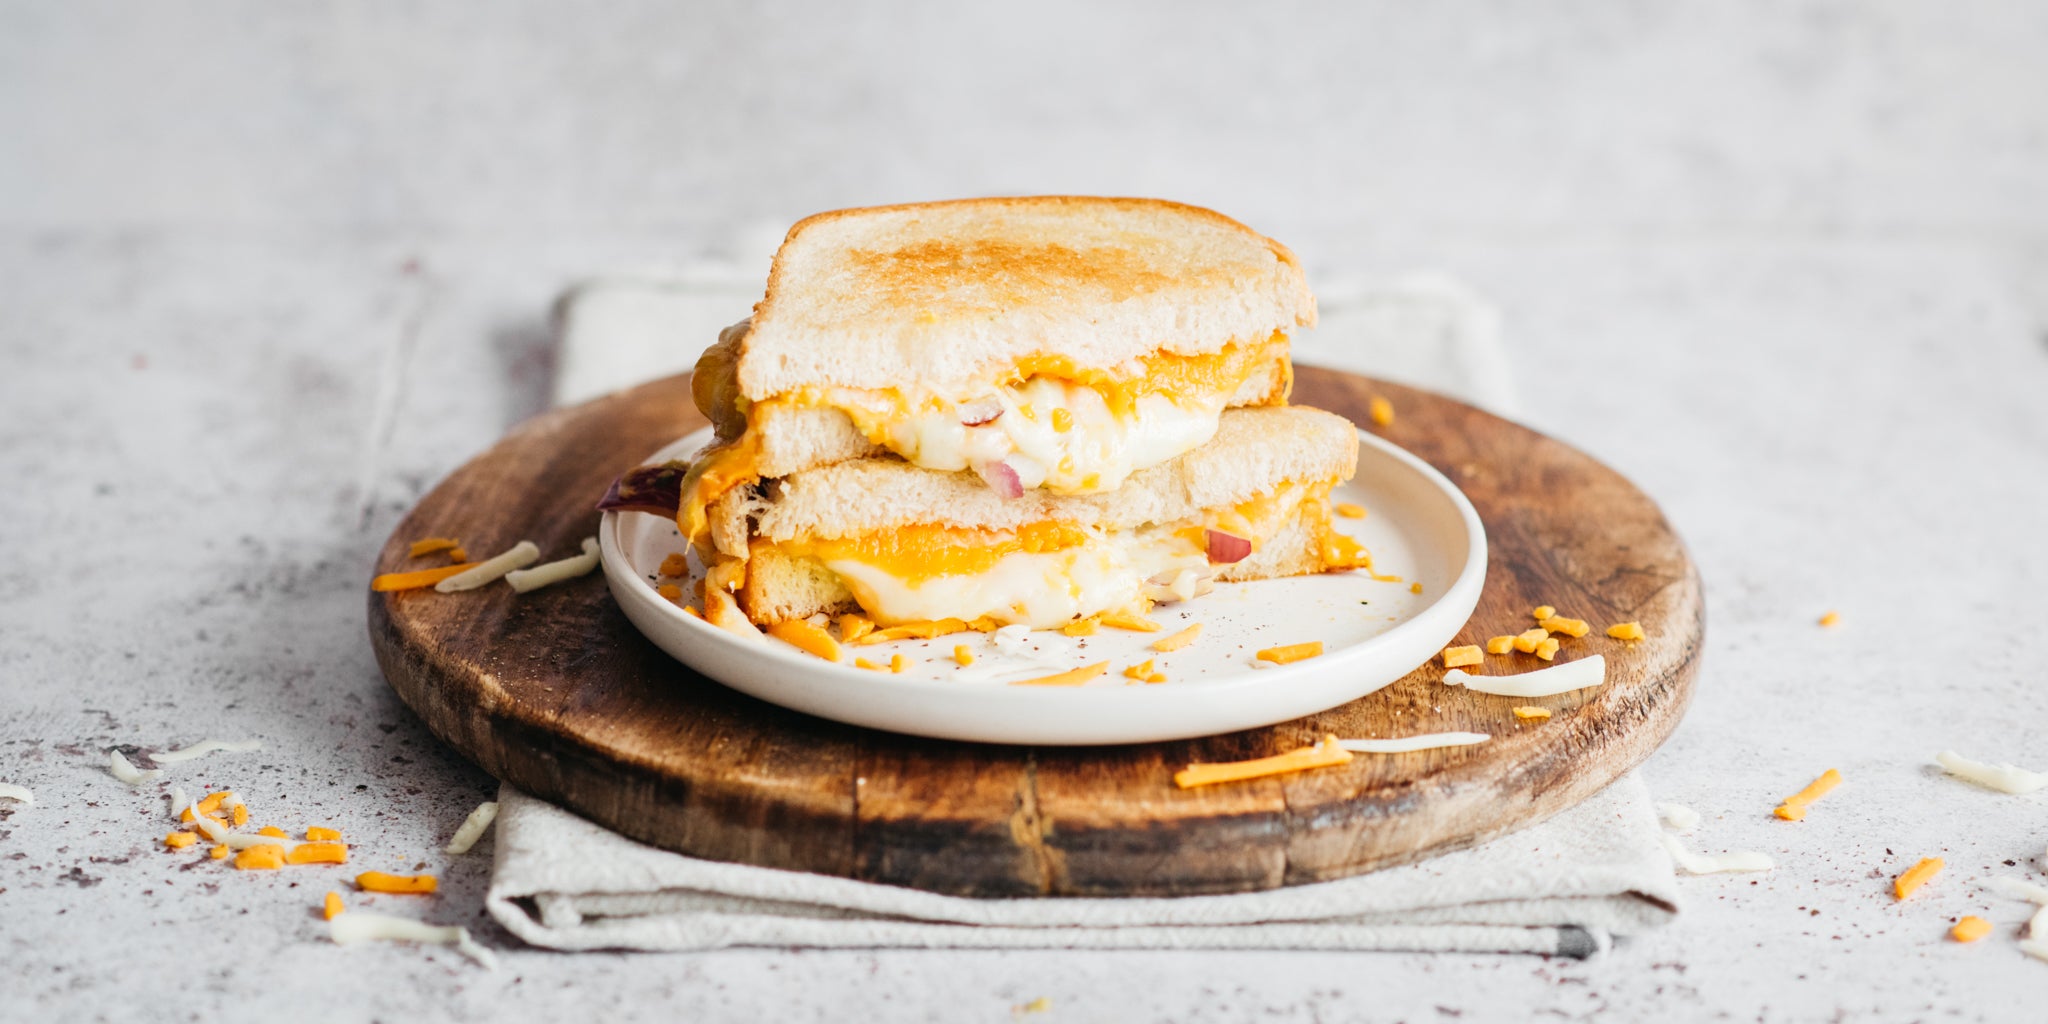 Fried egg sandwich made with fresh homemade white bread